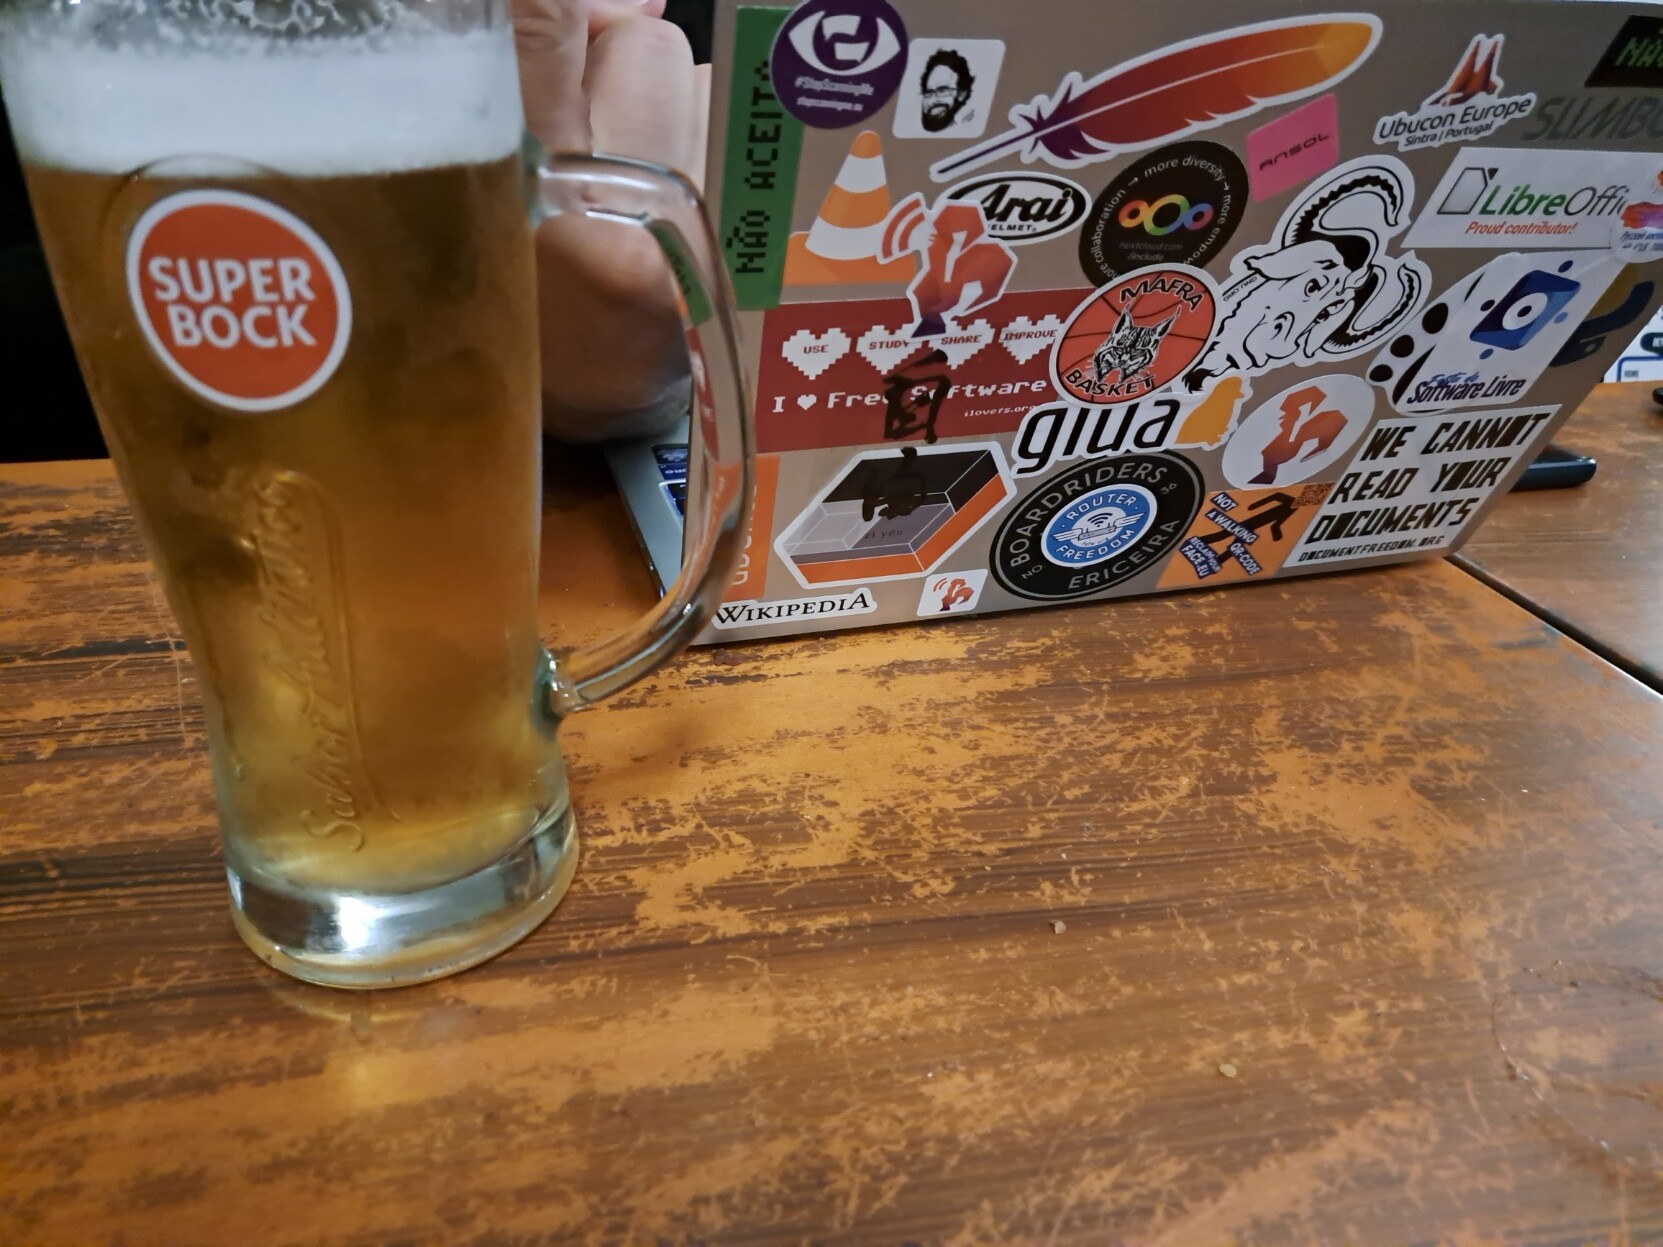 Preparatory meeting with some beer and a laptop full of stickers